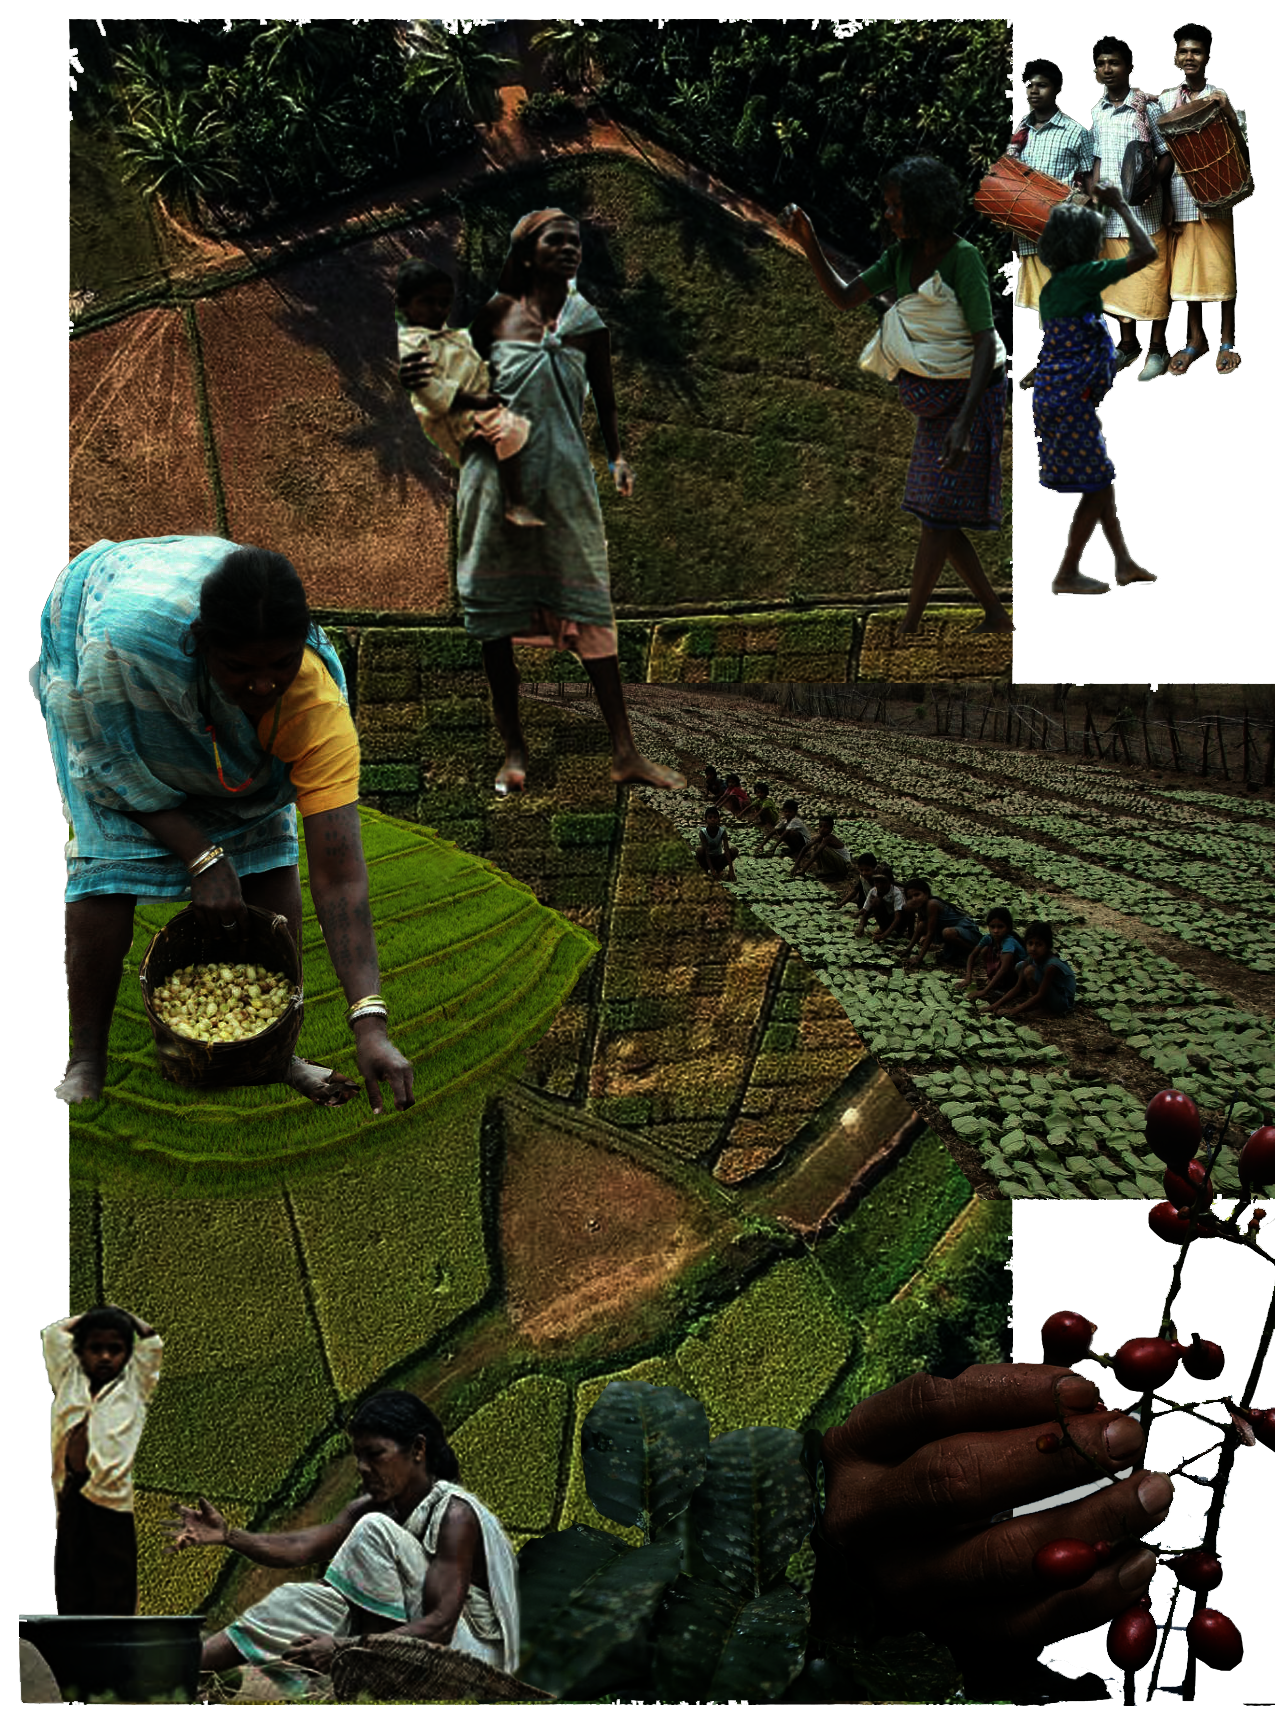 A collage of various Traditional Ecological Practices